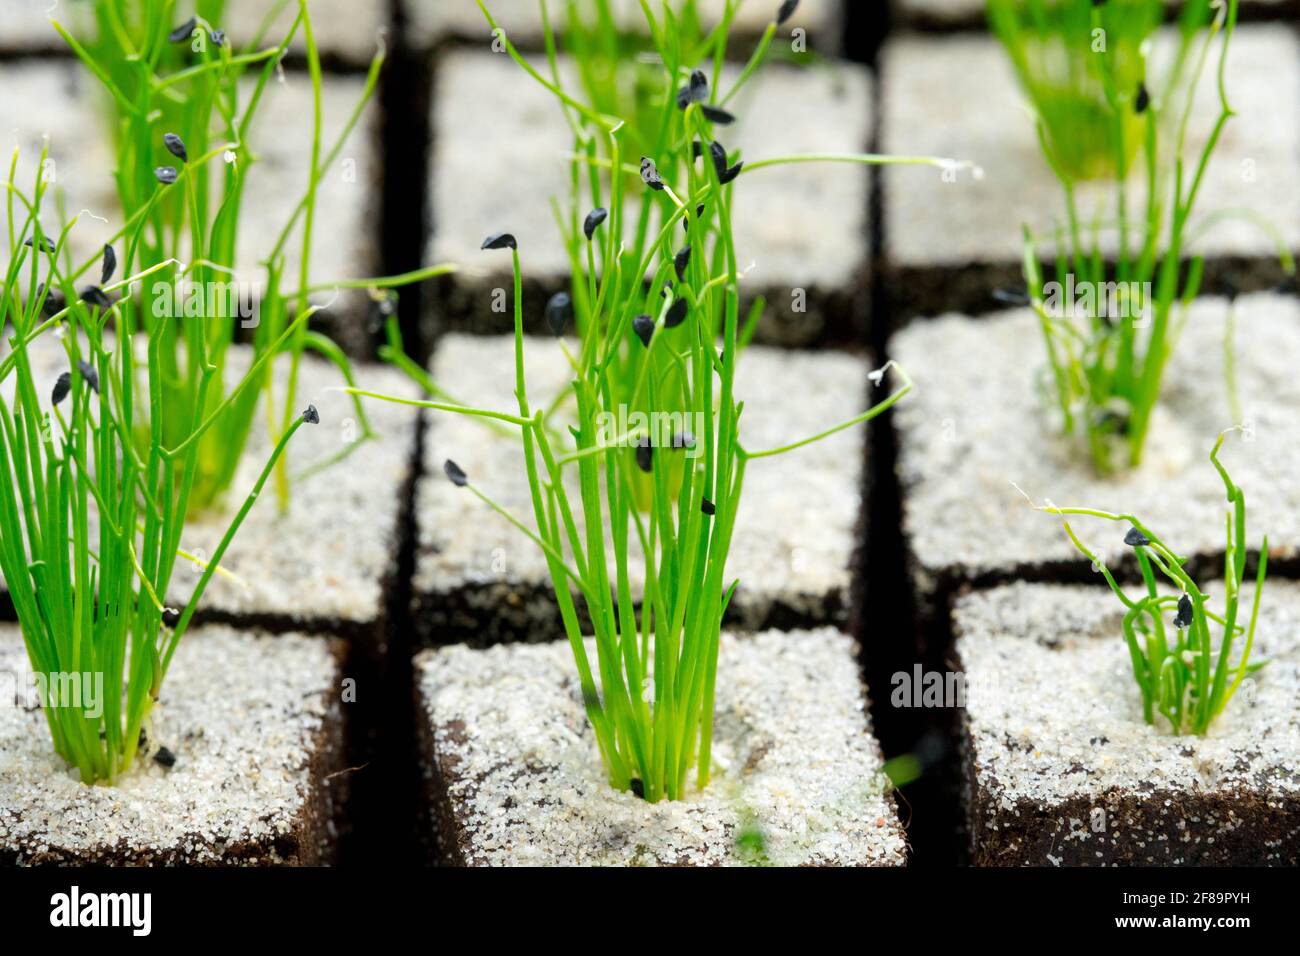 Close up of chives seedlings growing herbs Chives pots Stock Photo